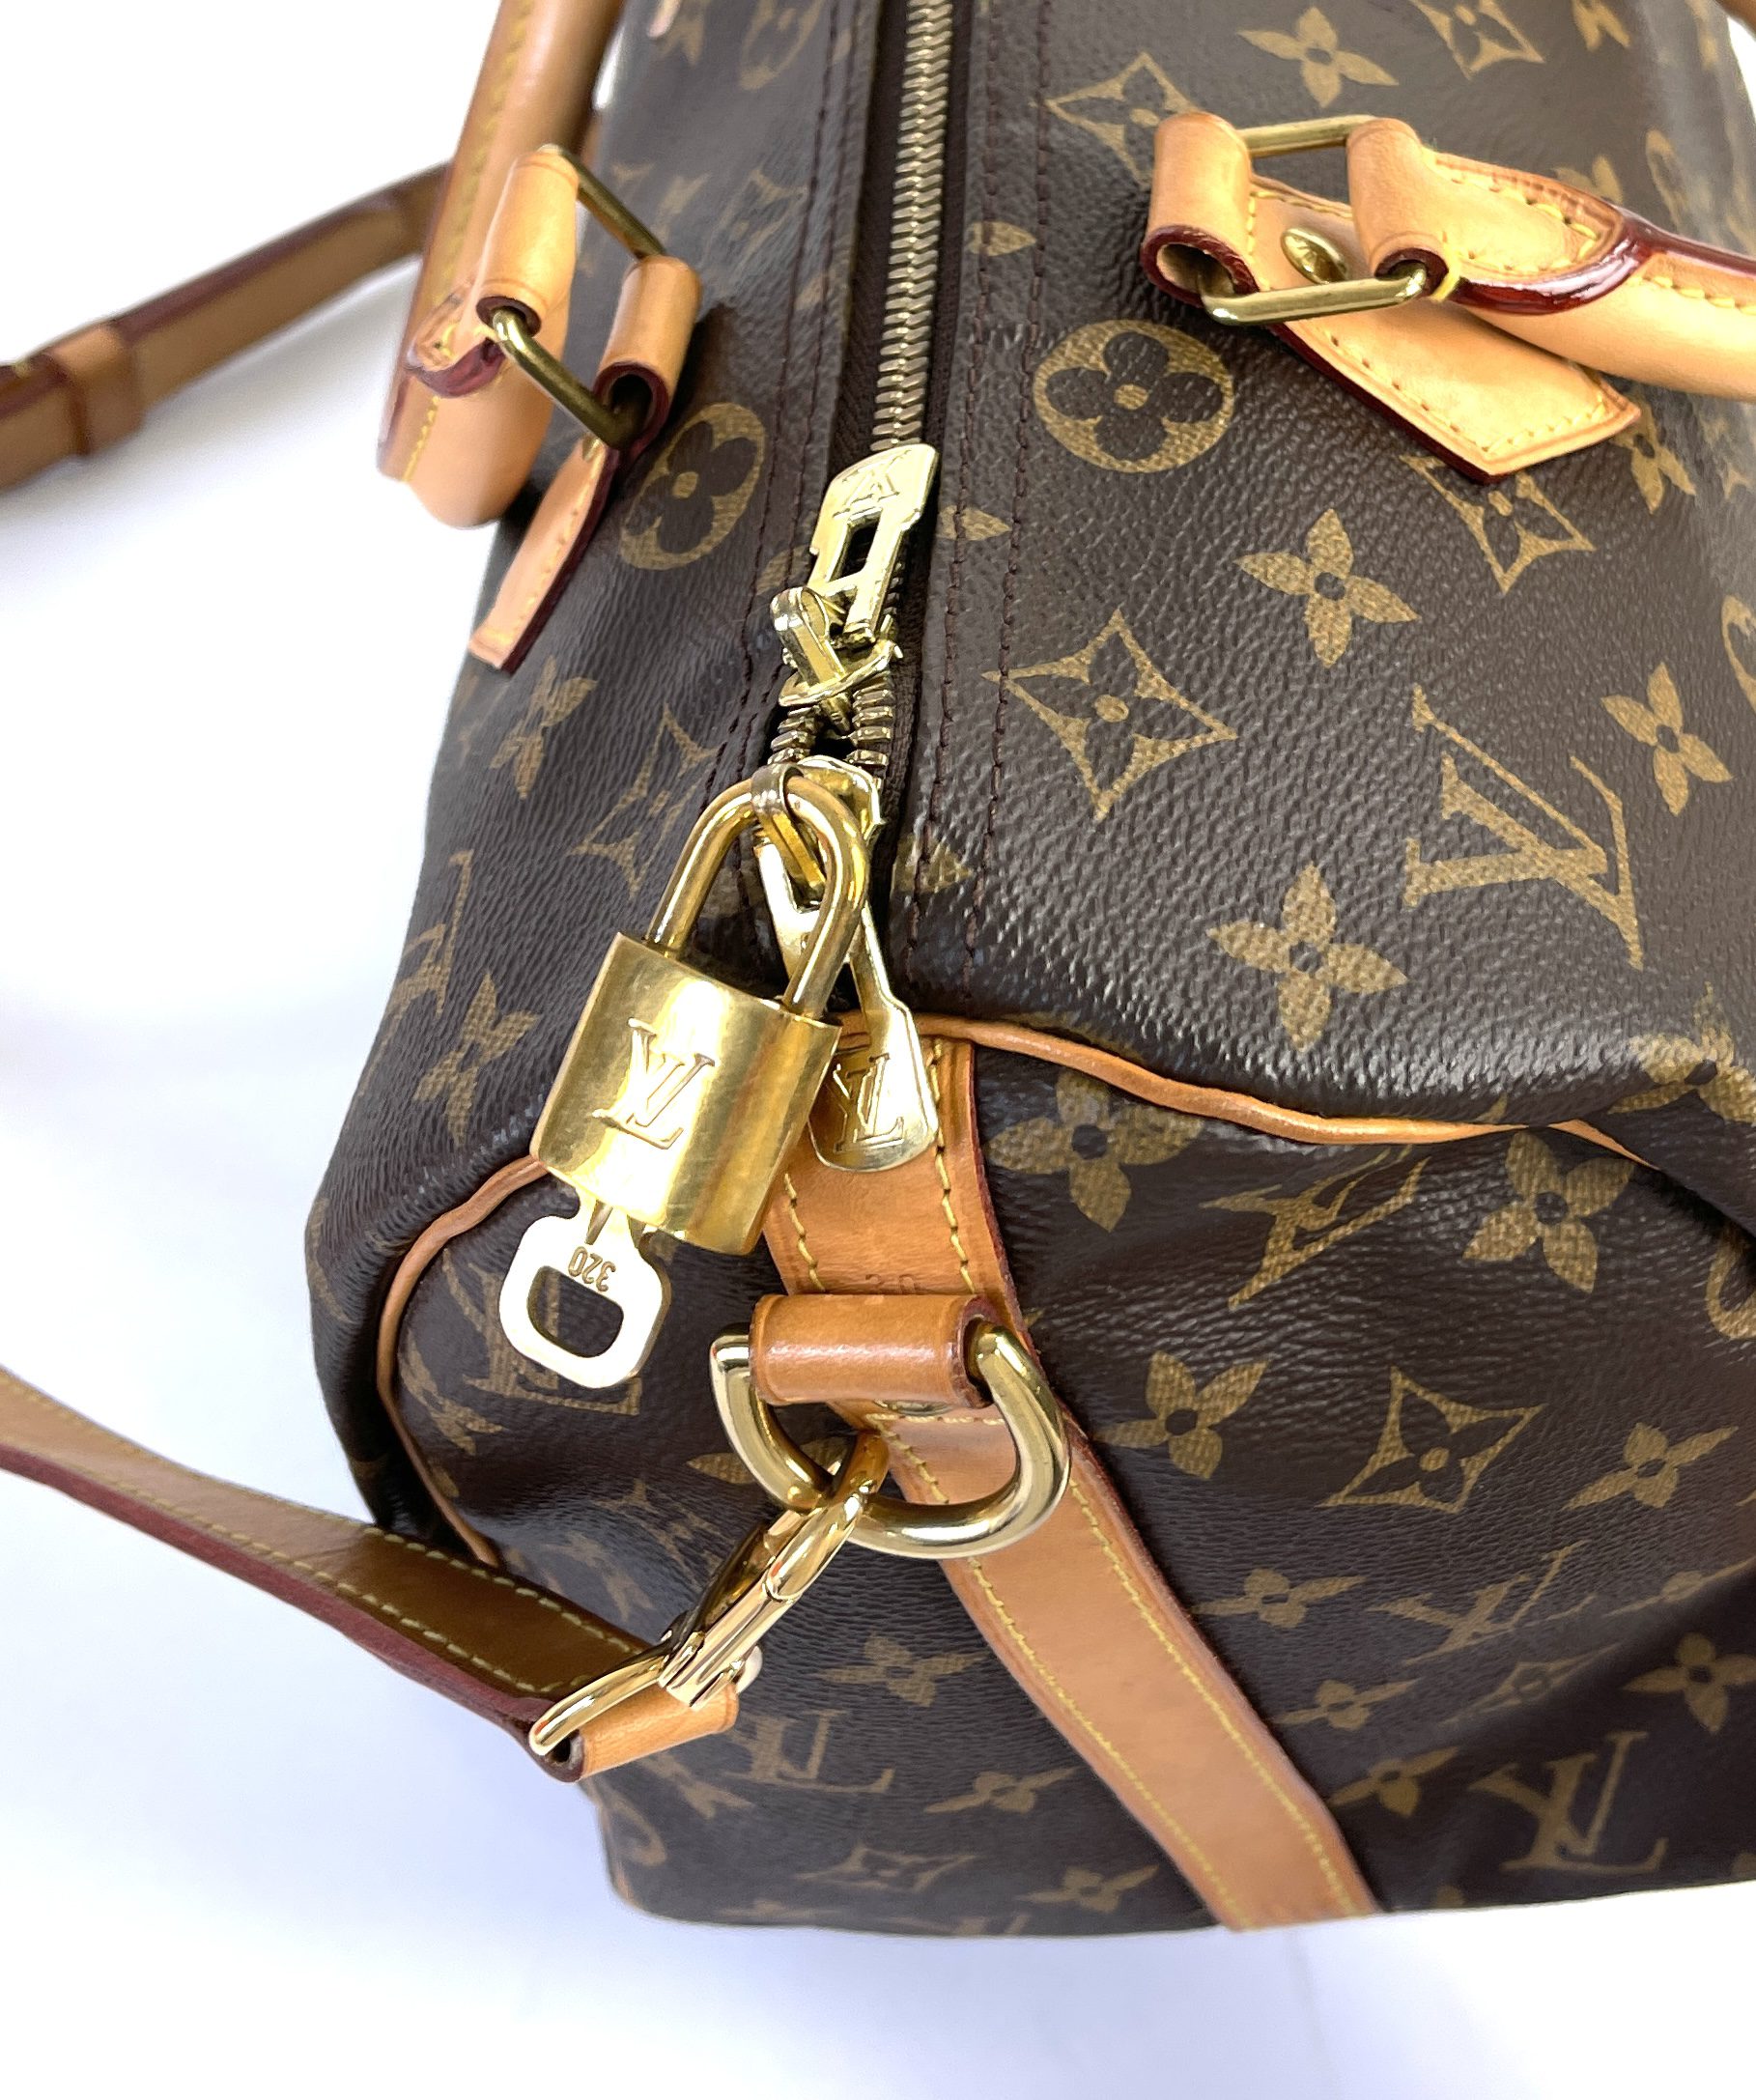 Used Louis Vuitton speedy bandouliere 30 handbag / LARGE - LEATHER